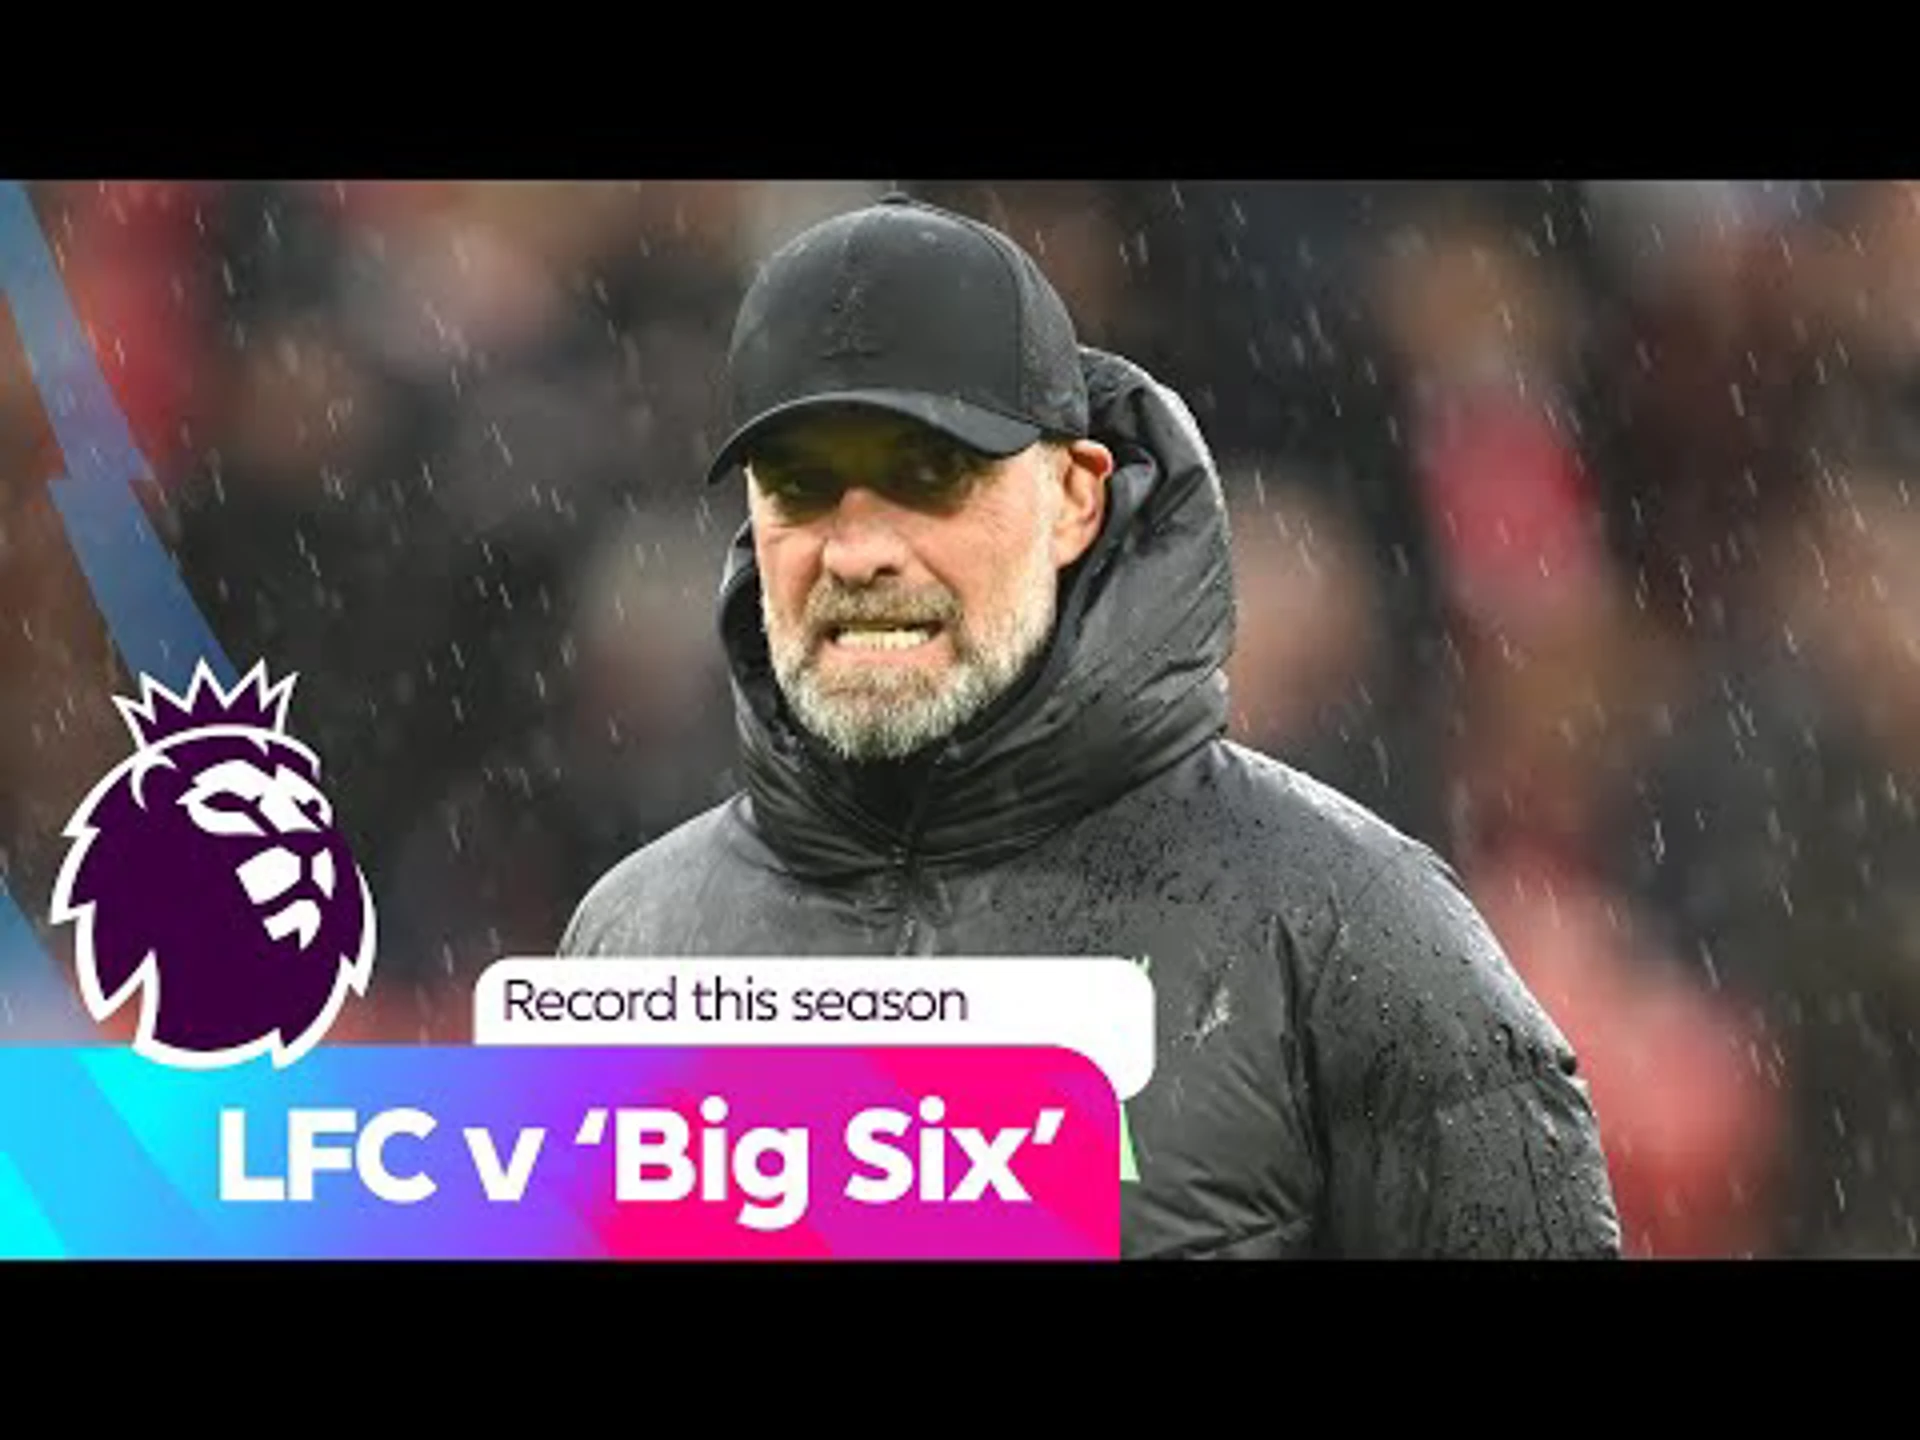 Dropped points! Liverpool's record vs the Big Six this season | Premier League